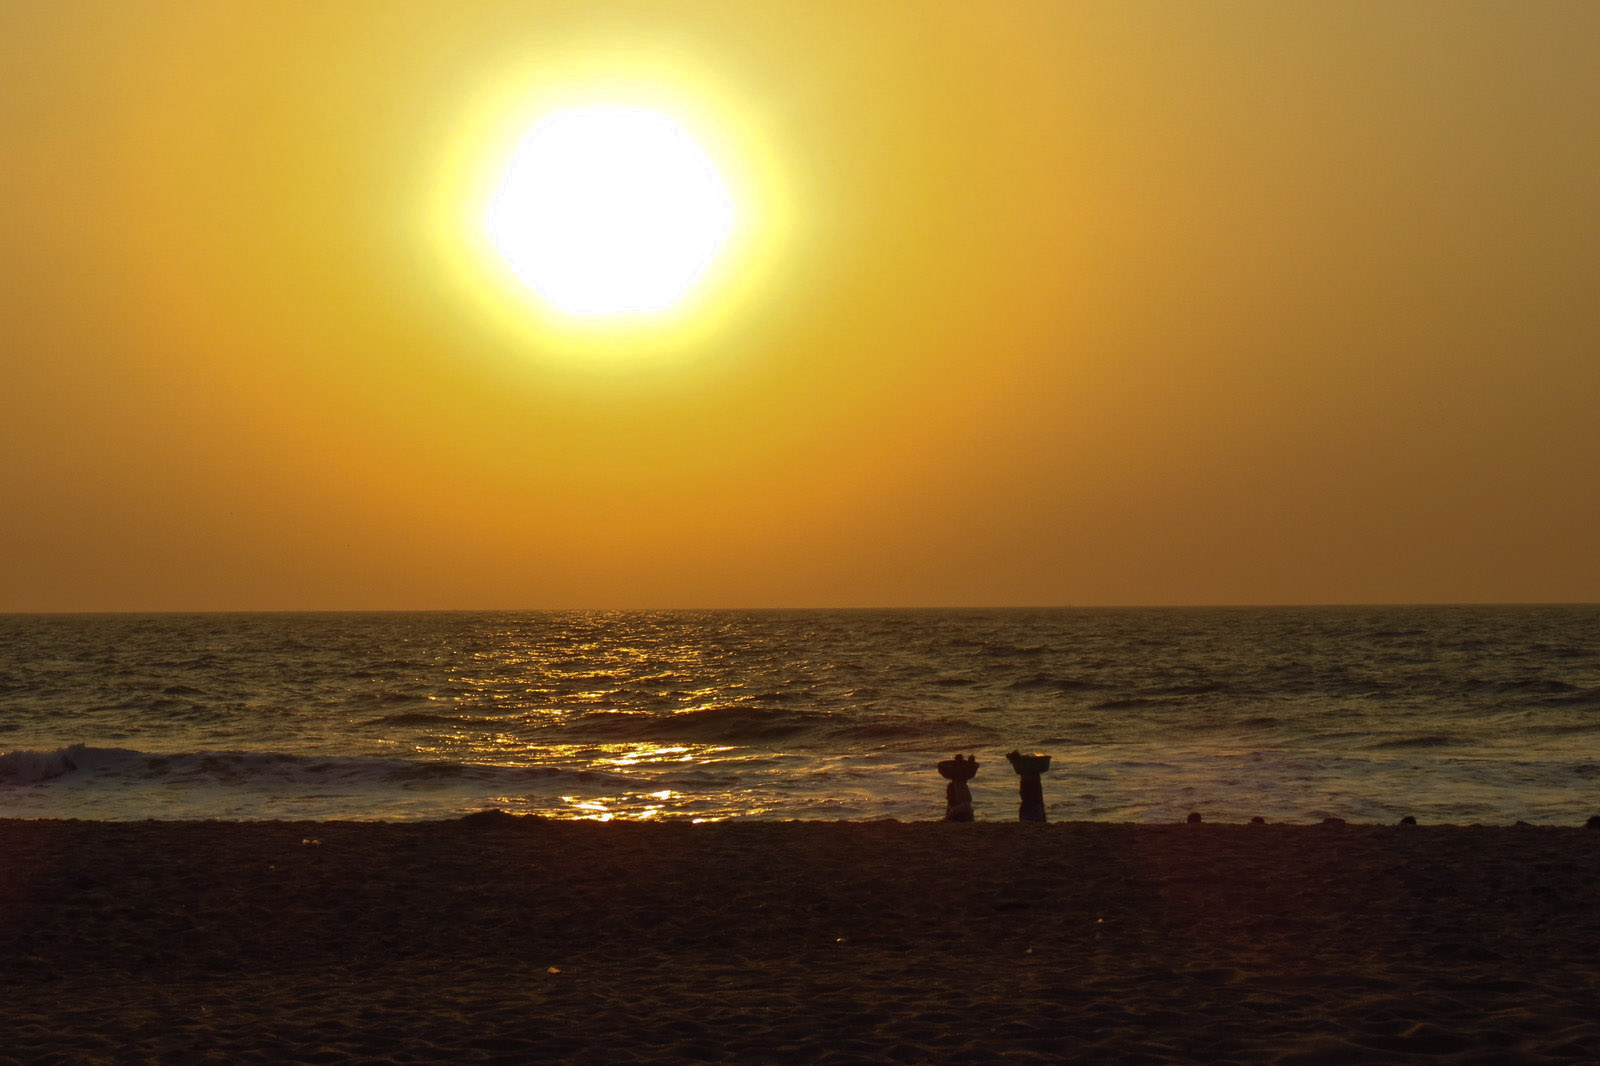 goa-sunset-with-sellers-in-distance